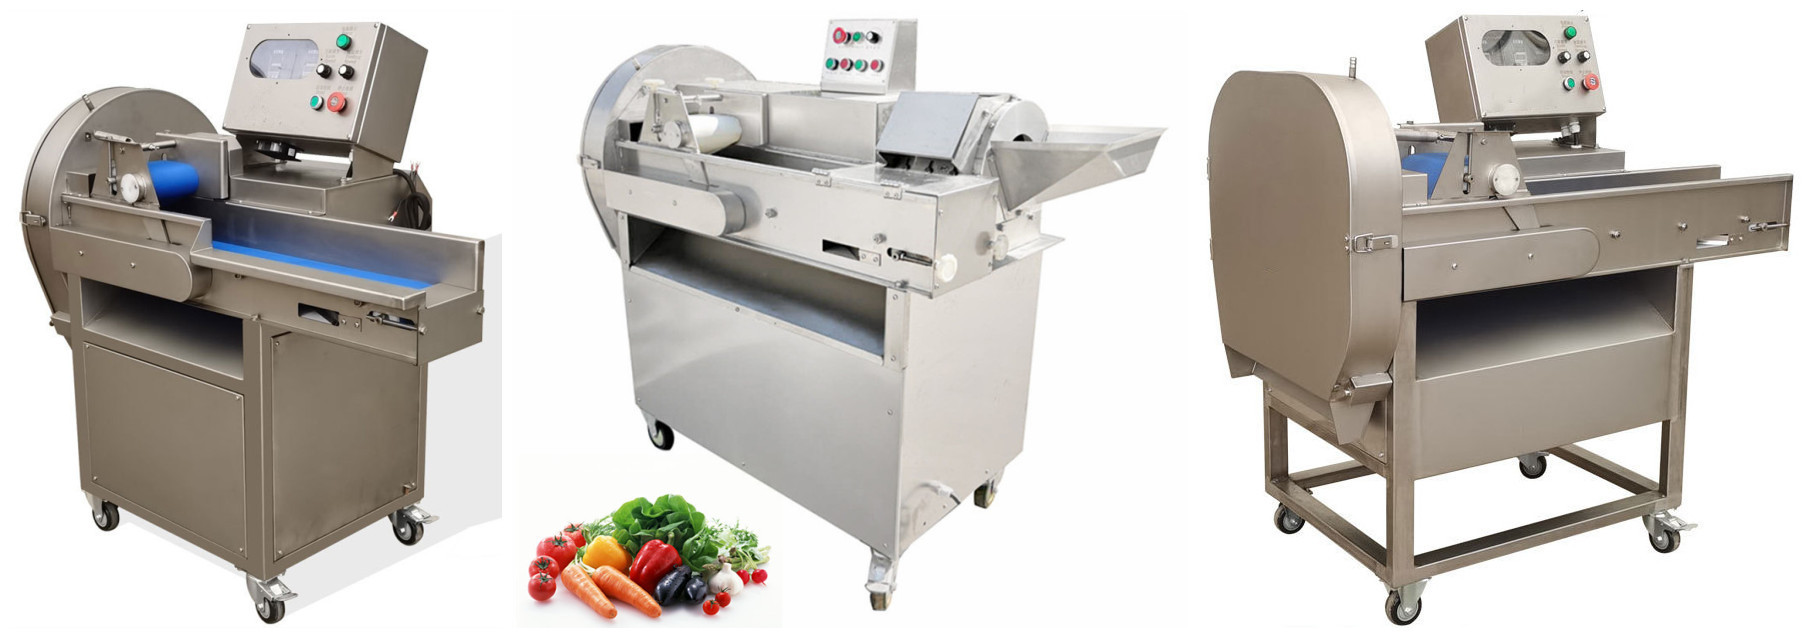 Hcd-80 Low Noise High-power Motor High Quality Commercial Digital Vegetable Cutter Conveyor Vegetable Cutting Machine